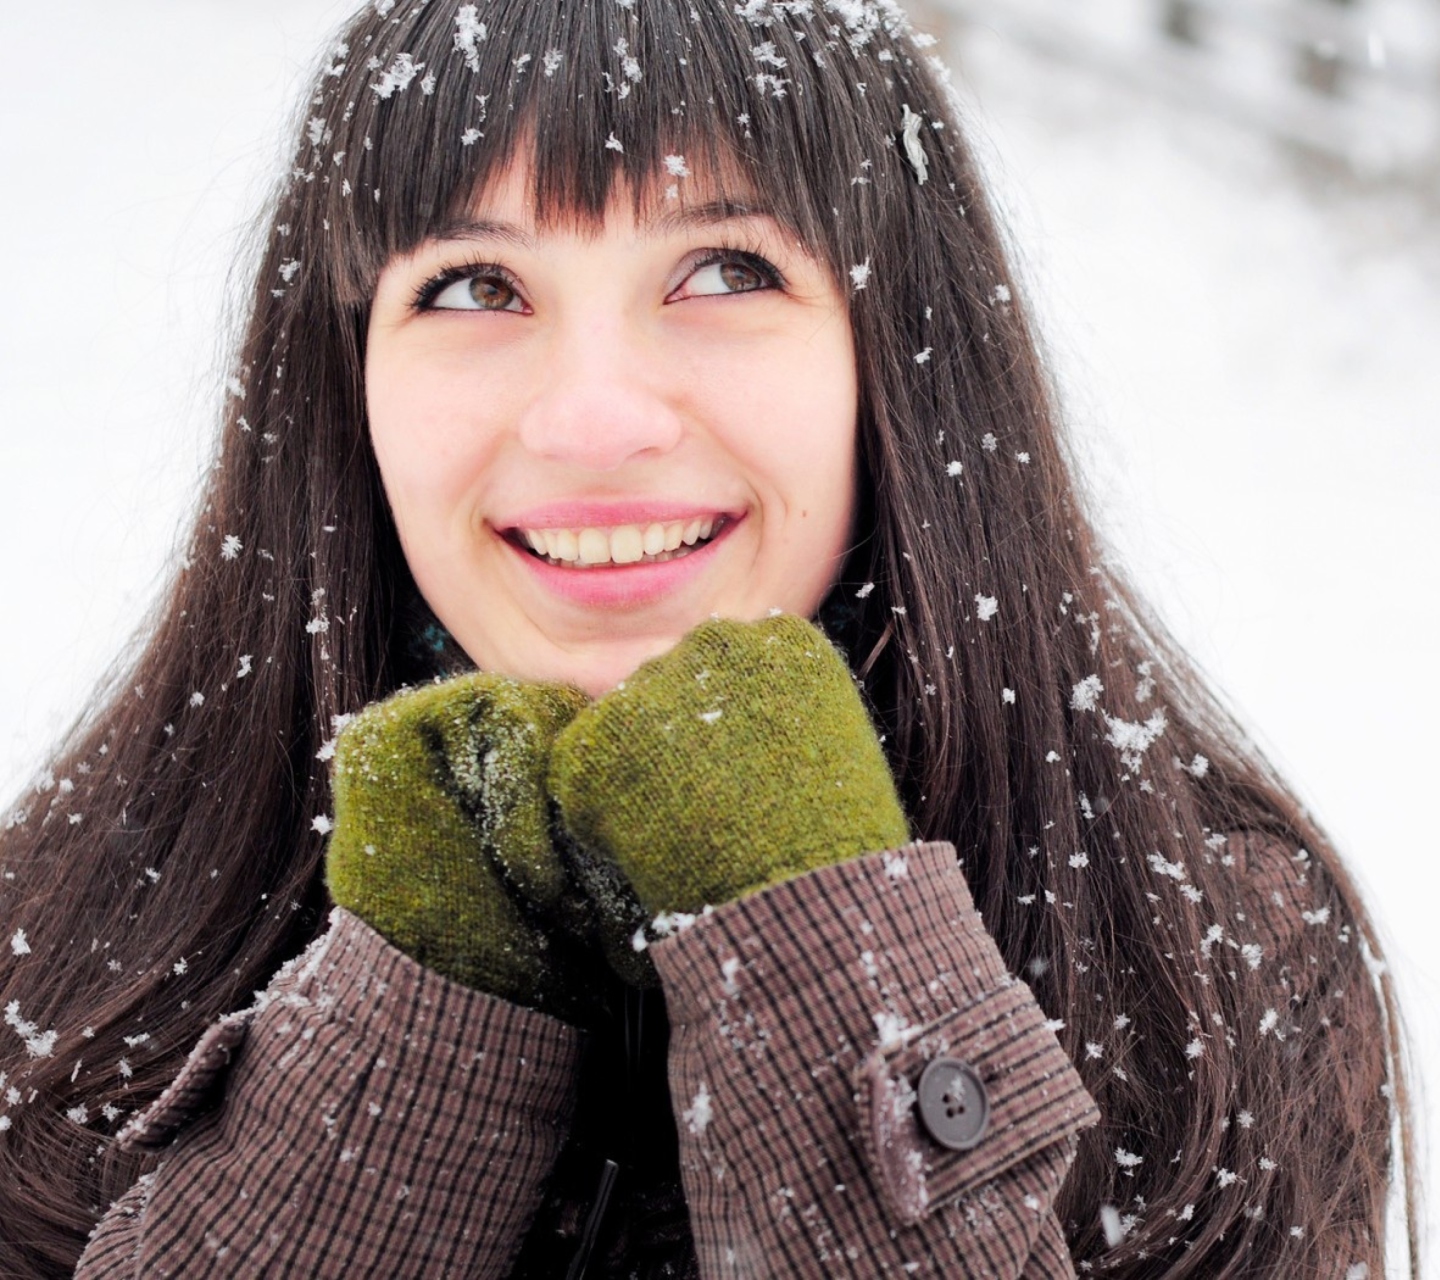 Brunette With Green Gloves In Snow wallpaper 1440x1280